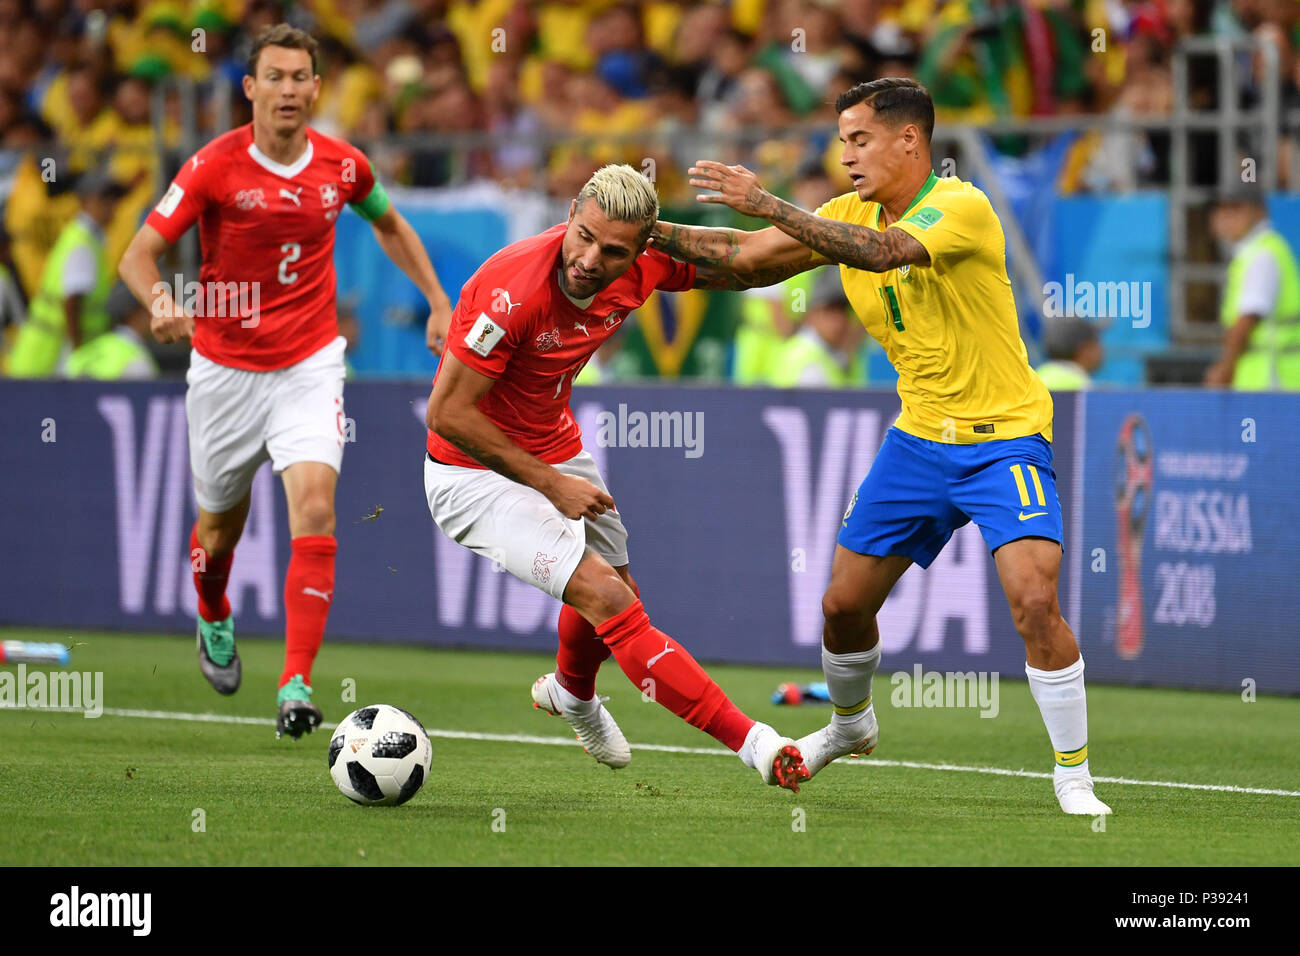 Rostov On Don, Russland. 17th June, 2018. Valon BEHRAMI (SUI), Action, duels versus PHILIPPE COUTINHO (BRA). Brazil (BRA) -Switzerland (SUI) 1-1, Preliminary Round, Group E, match 09, on 17.06.2018 in Rostov-on-Don, Rostov Arena. Football World Cup 2018 in Russia from 14.06. - 15.07.2018. | usage worldwide Credit: dpa/Alamy Live News Stock Photo